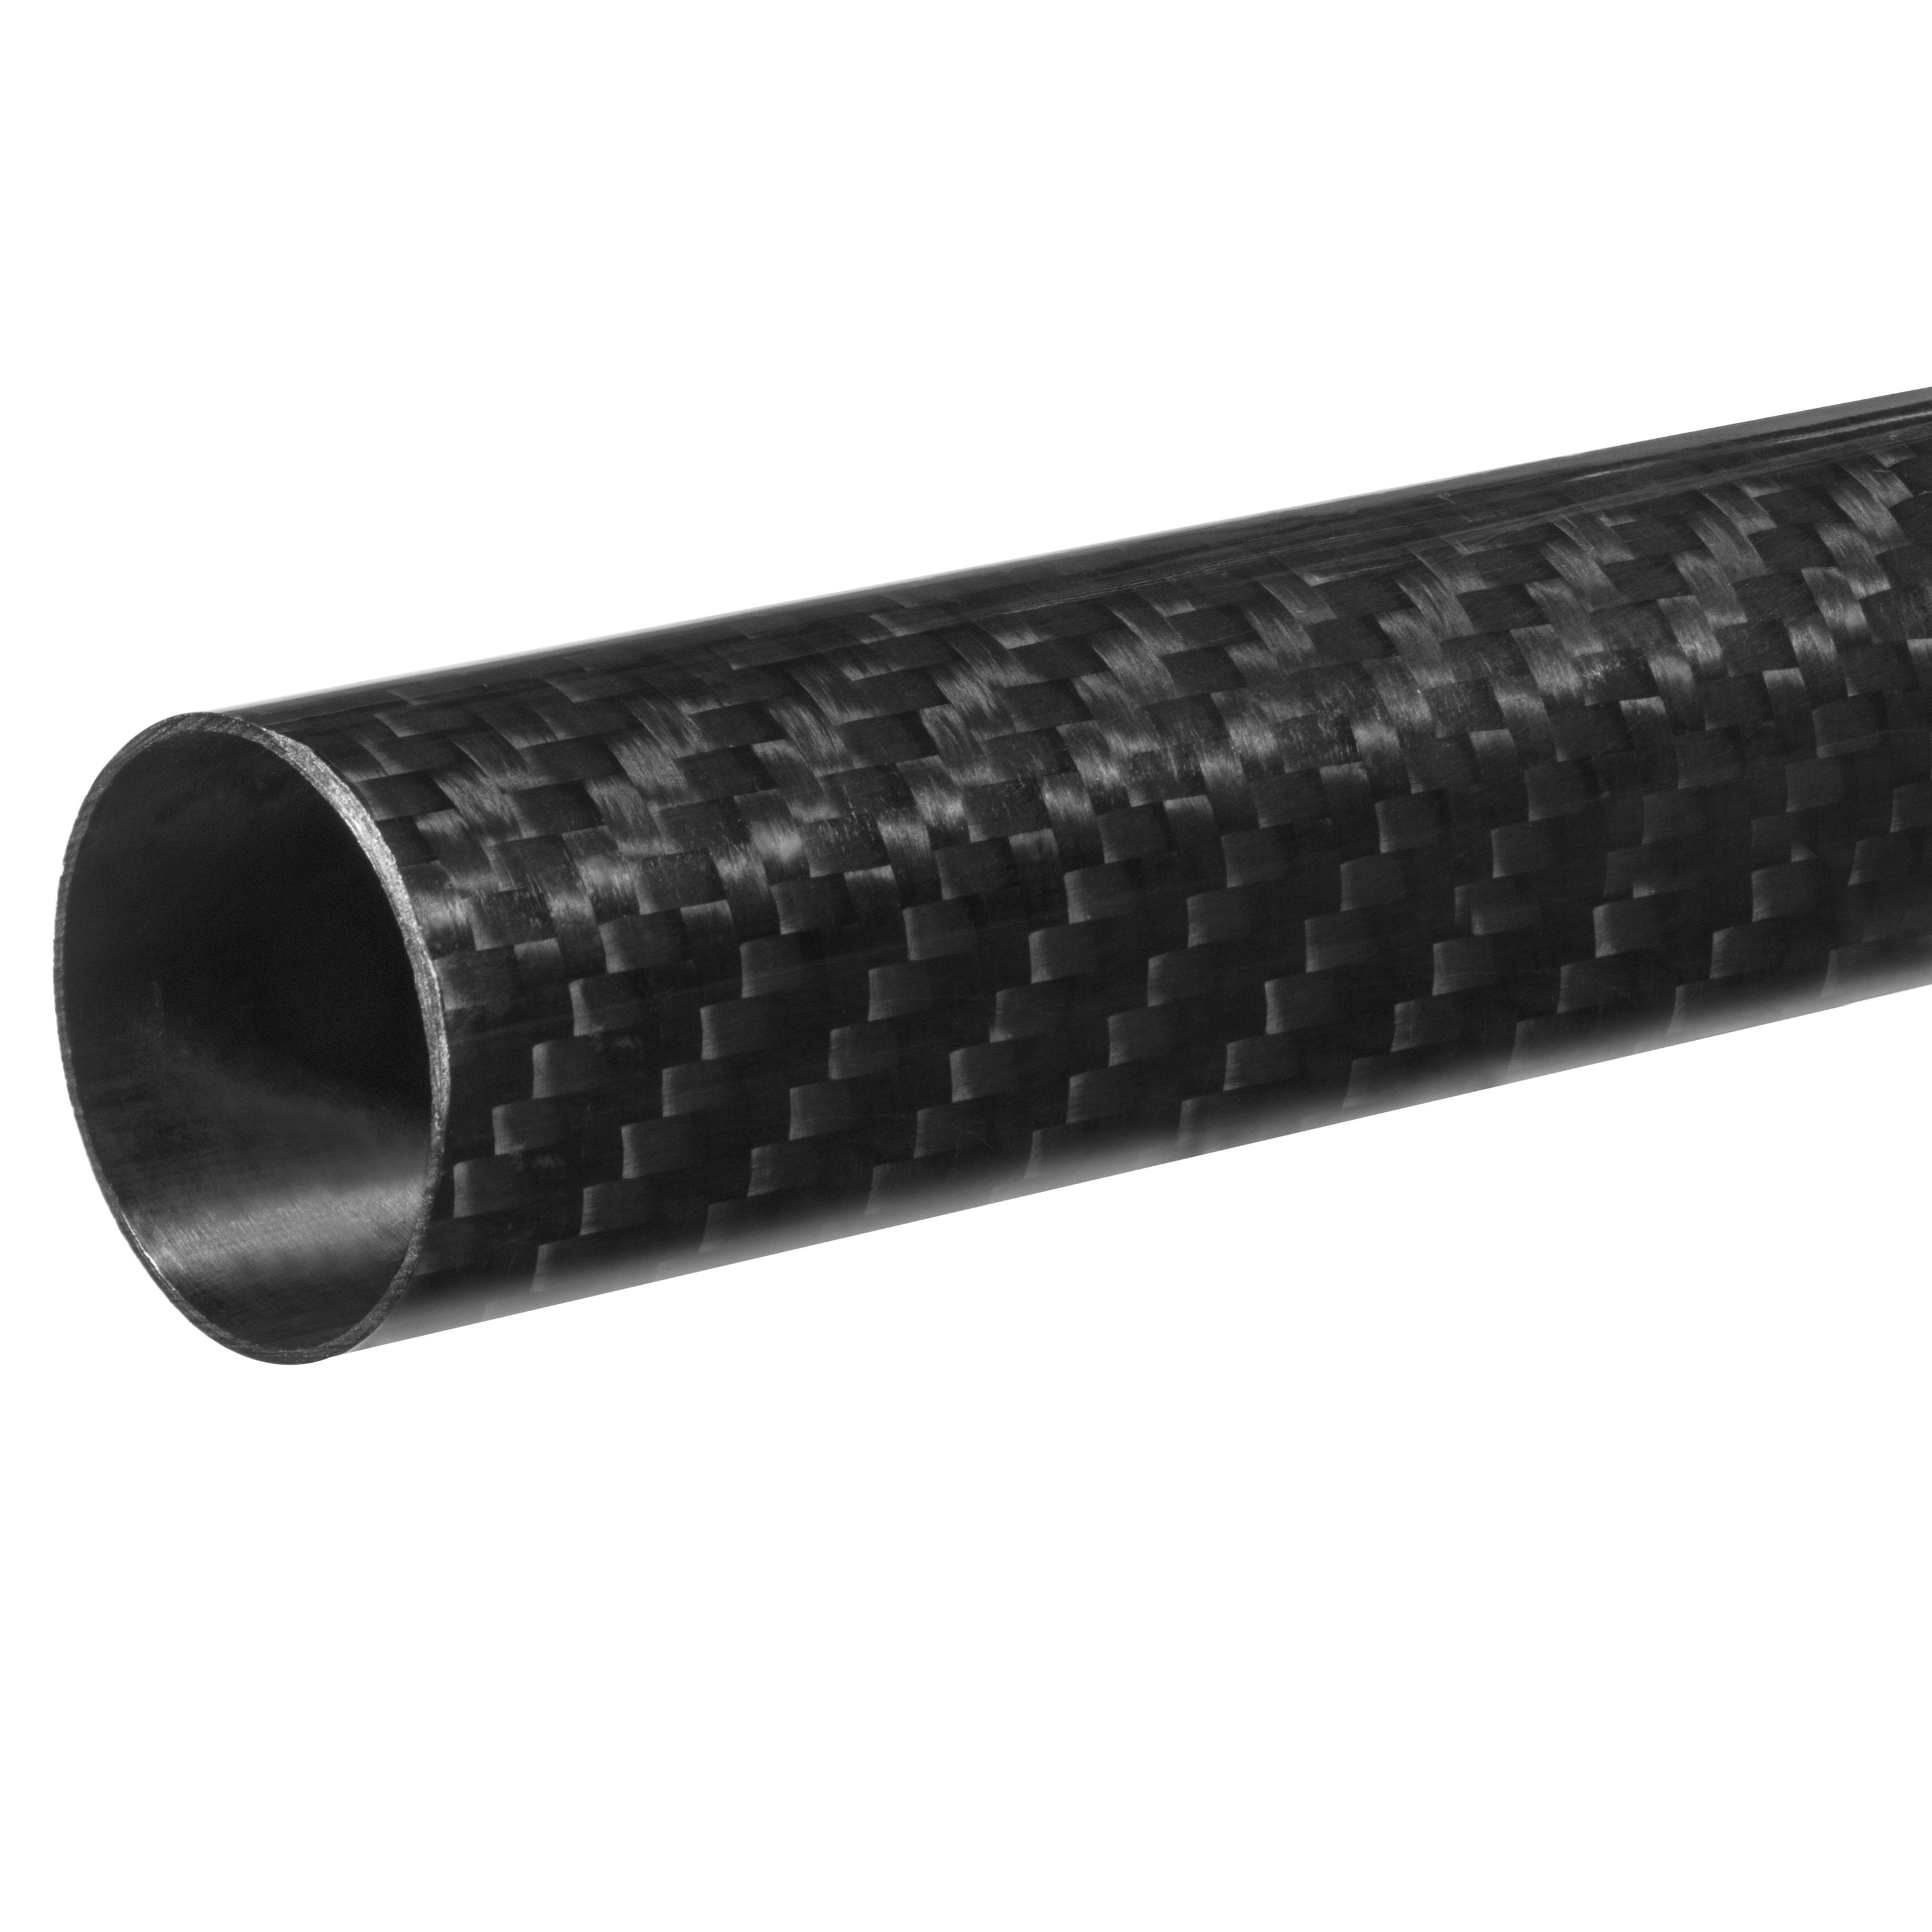 Carbon Fiber Round Tube Twill Weave 0.750 x 1.00 x 60 inches 